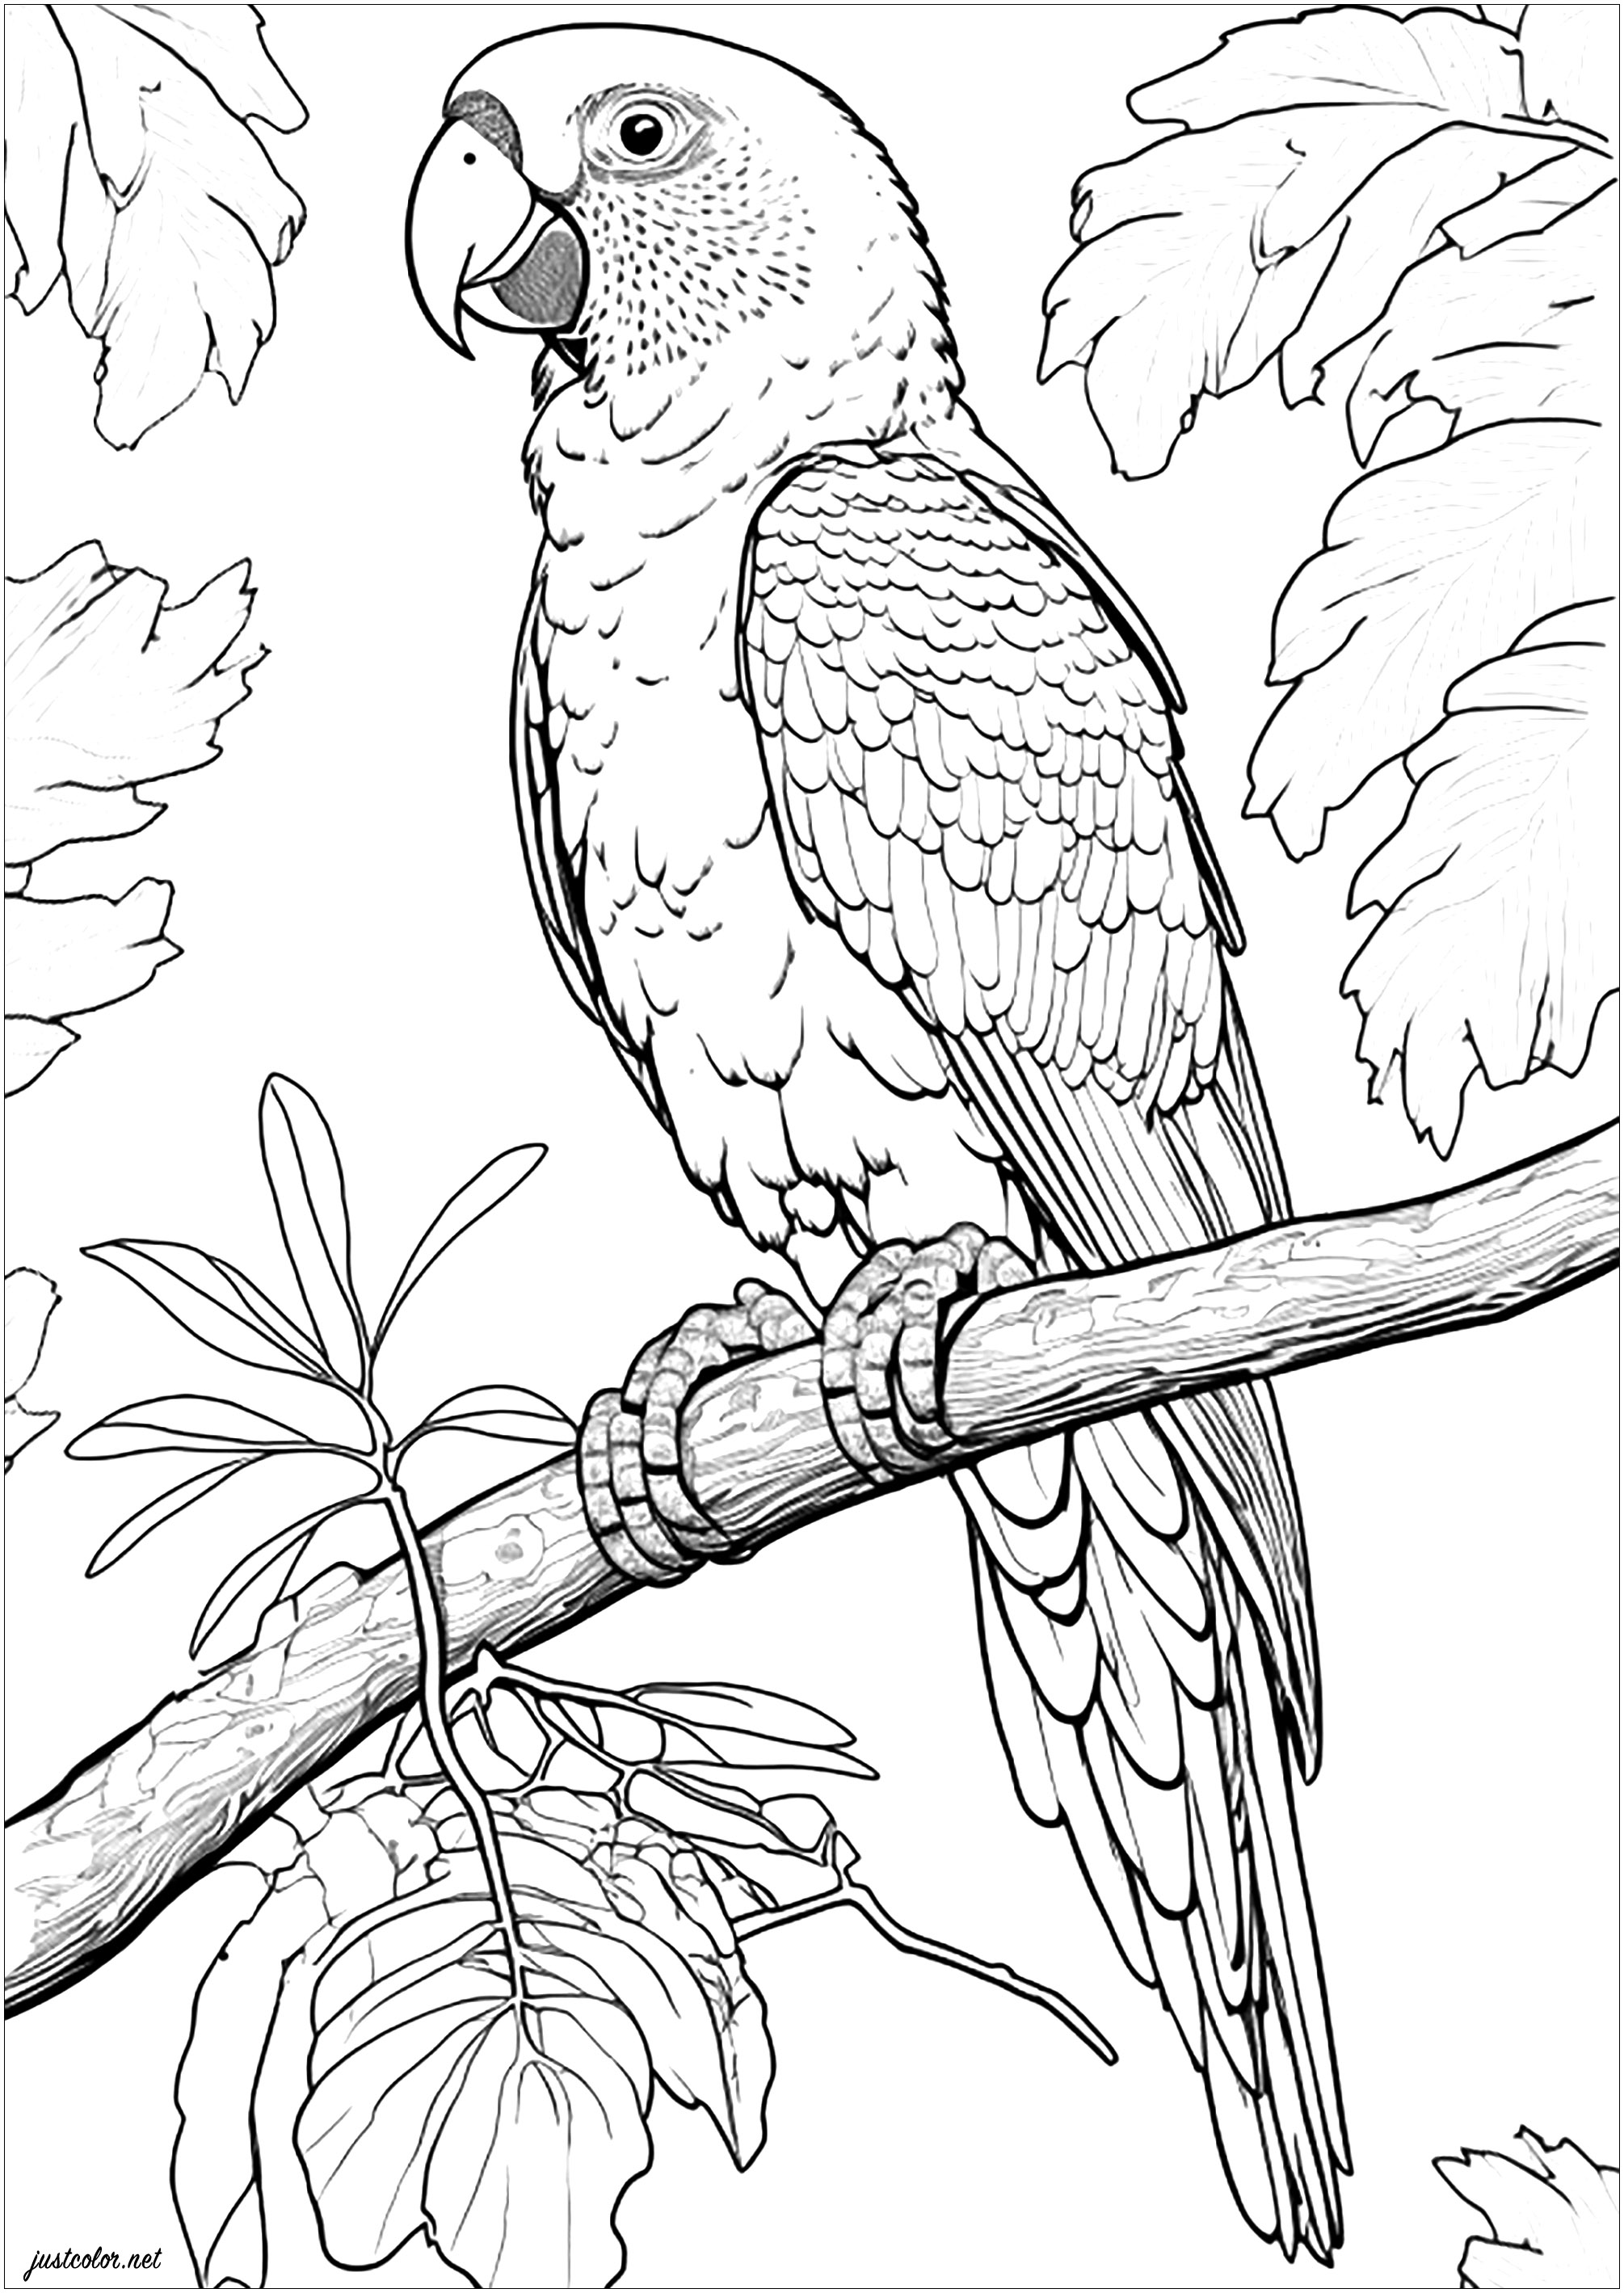 Coloring of an Amazon parrot very realistic. You will be able to give life to this parrot of the genus Amazona (Amazon) by coloring its feathers with the colors which you will want. Hint: Parrots of this species are green and yellow!
